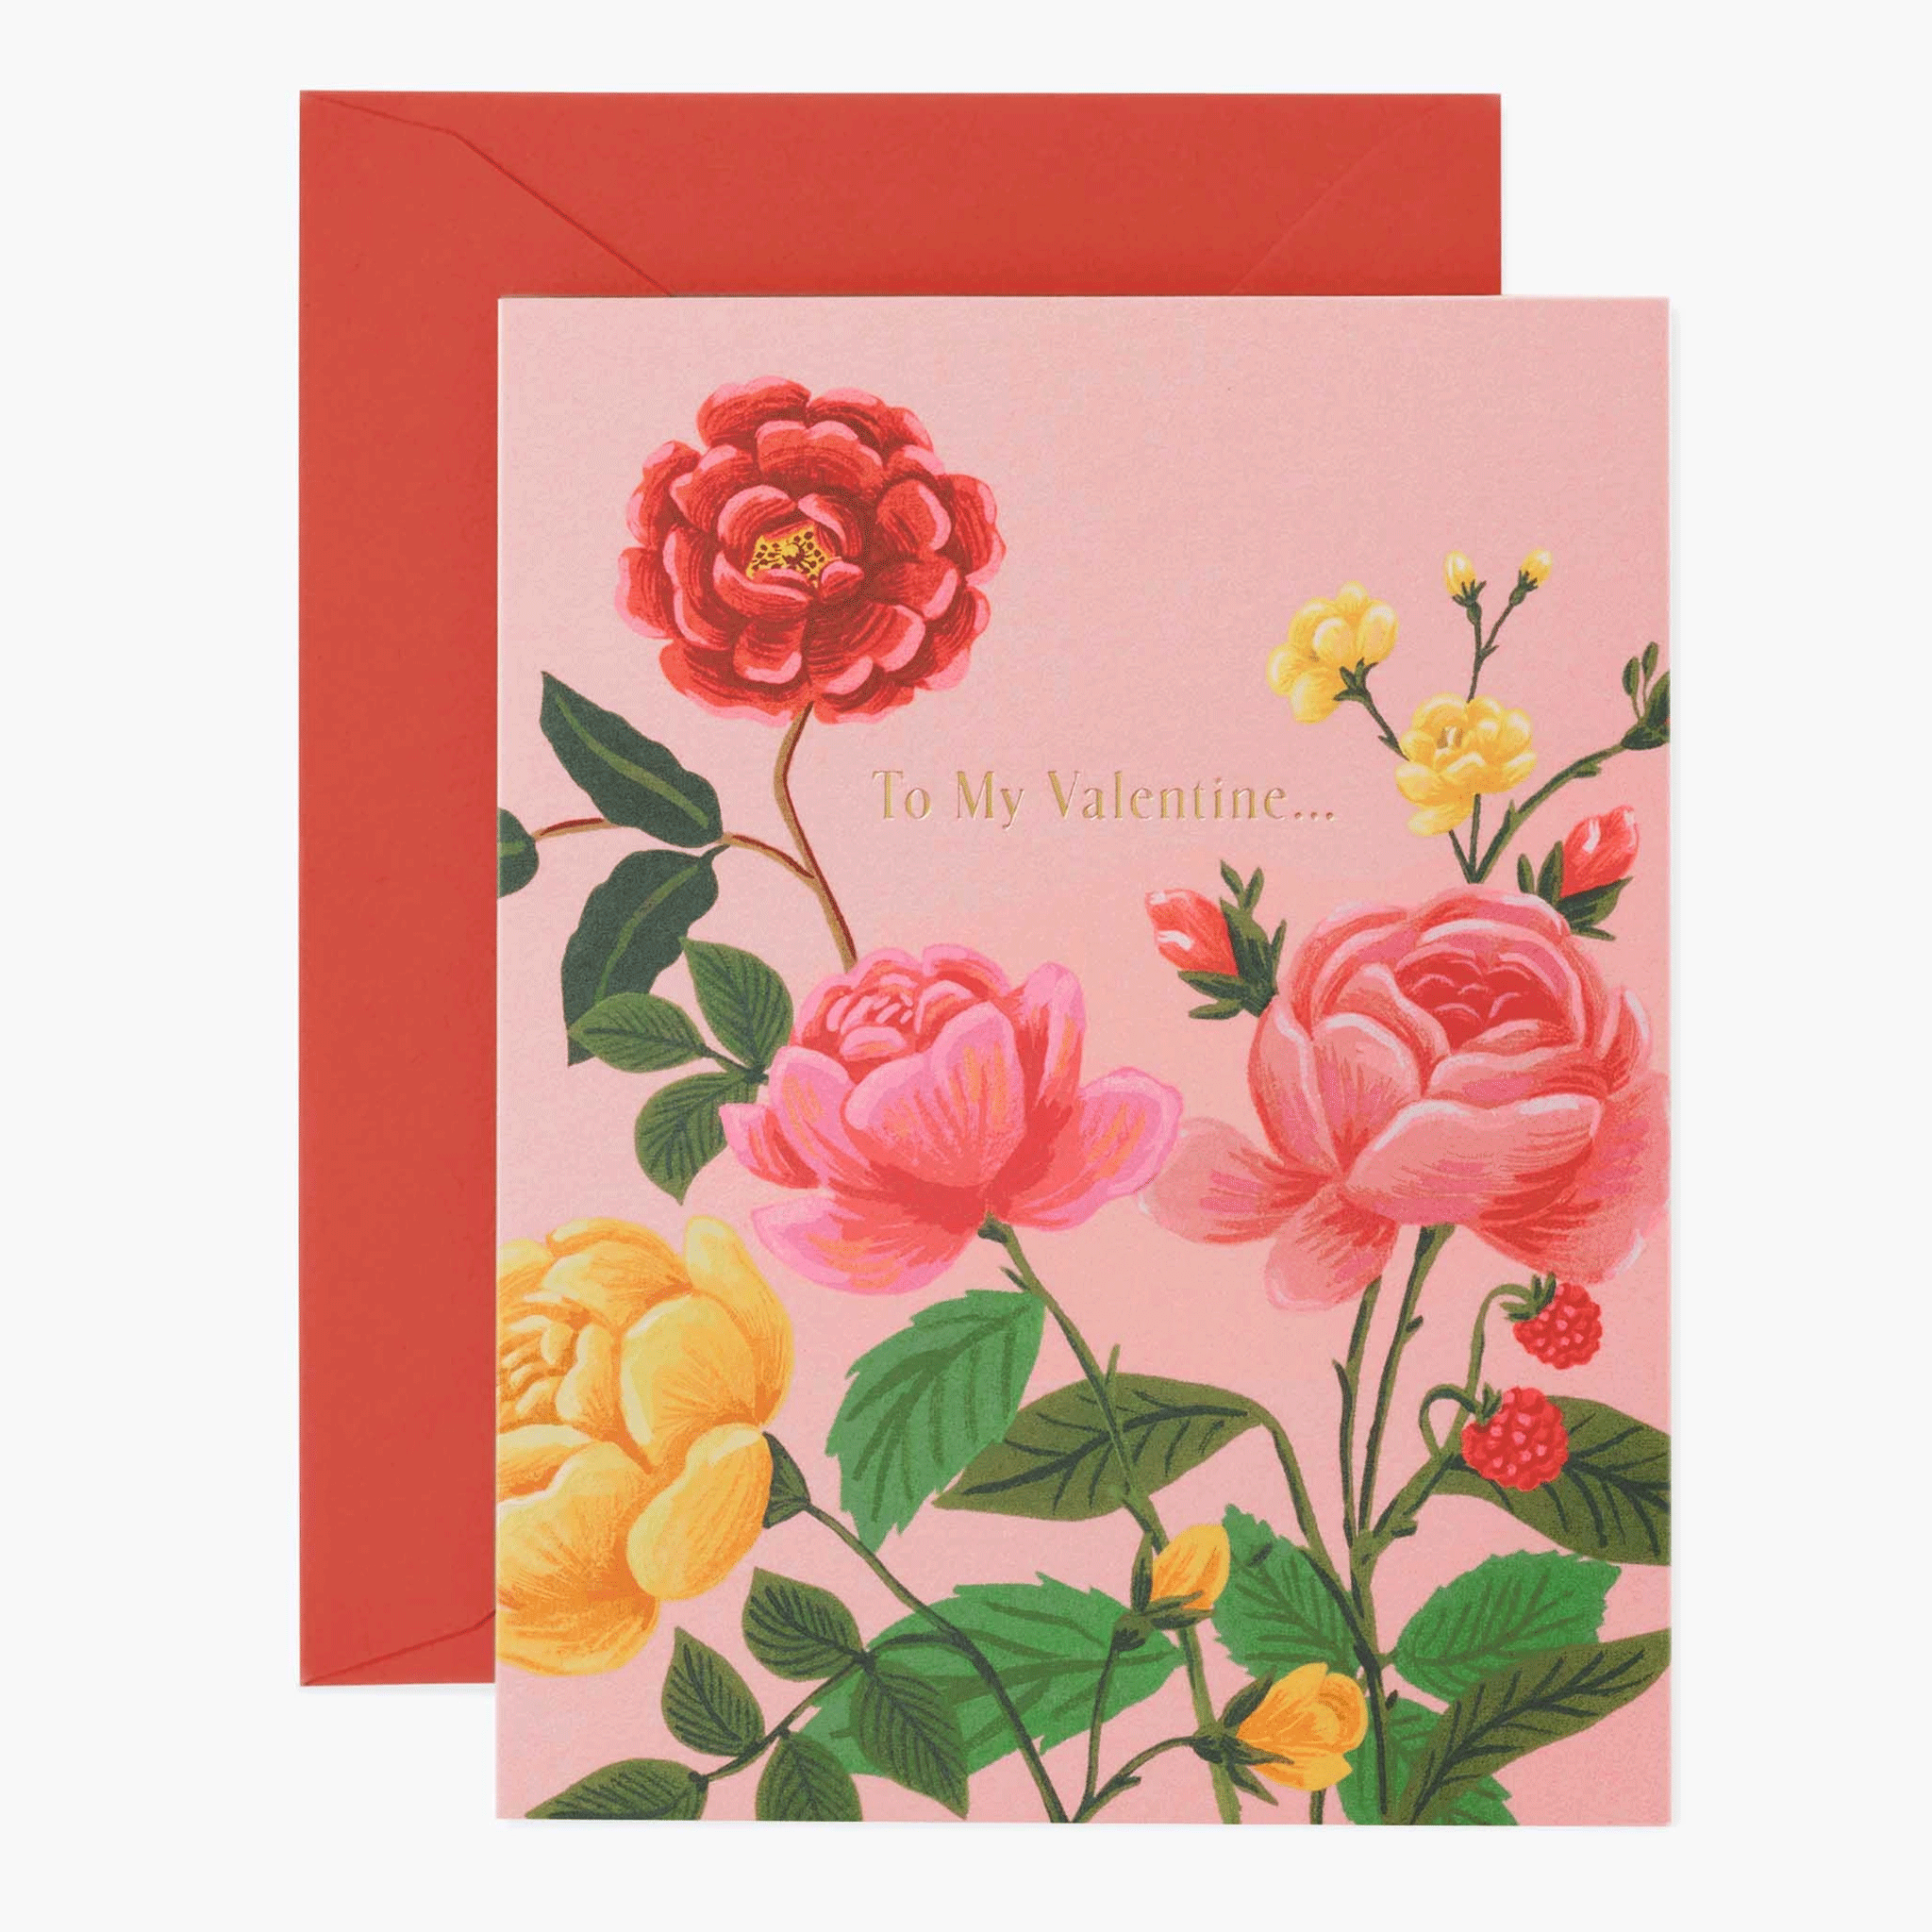 On a white background is a pink card with a floral print and text that reads, "To My Valentine..." as well as a coordinating red envelope. 